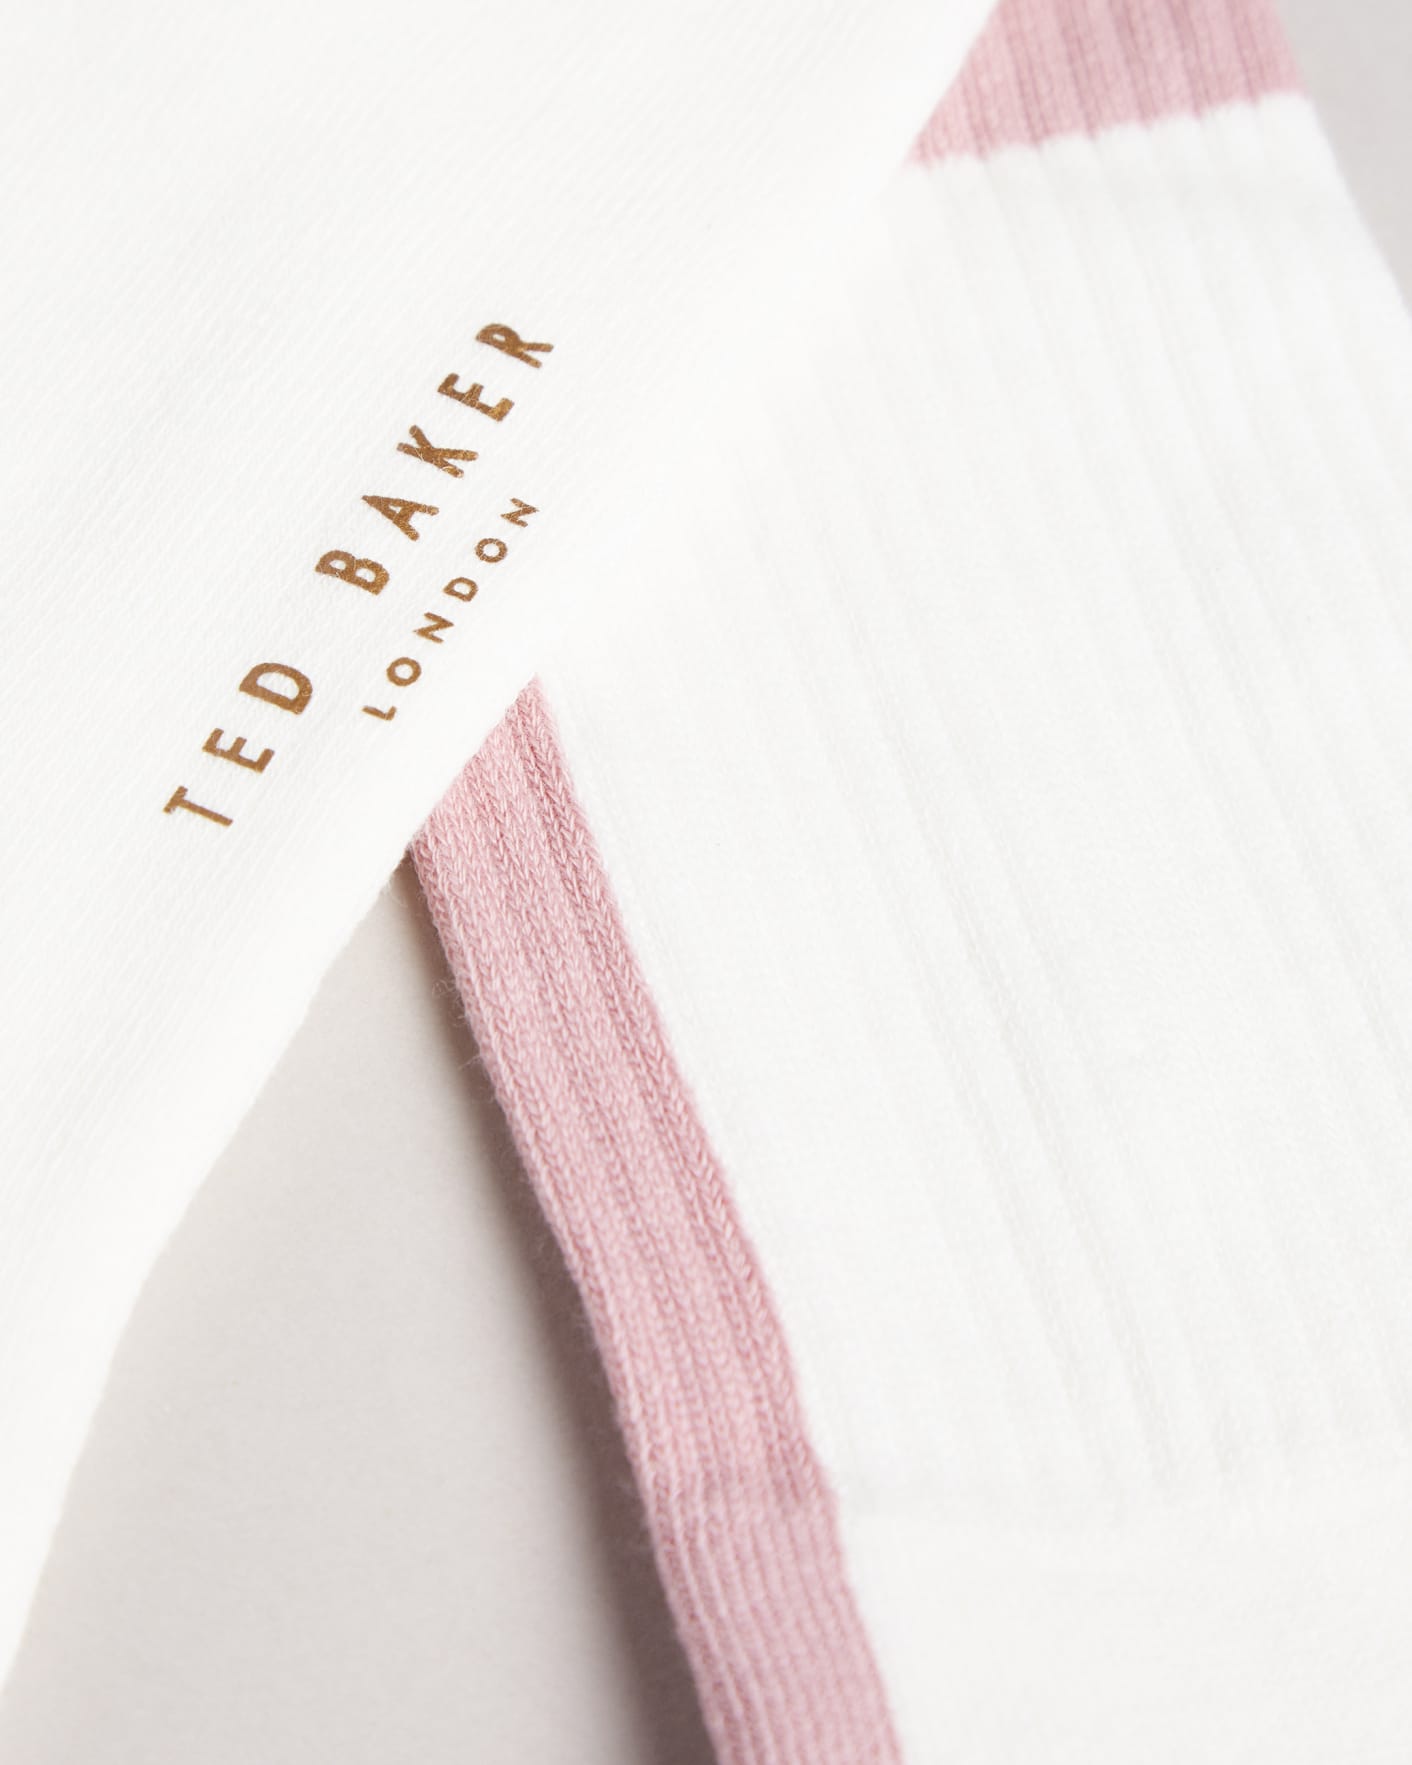 White T Placement Socks Ted Baker